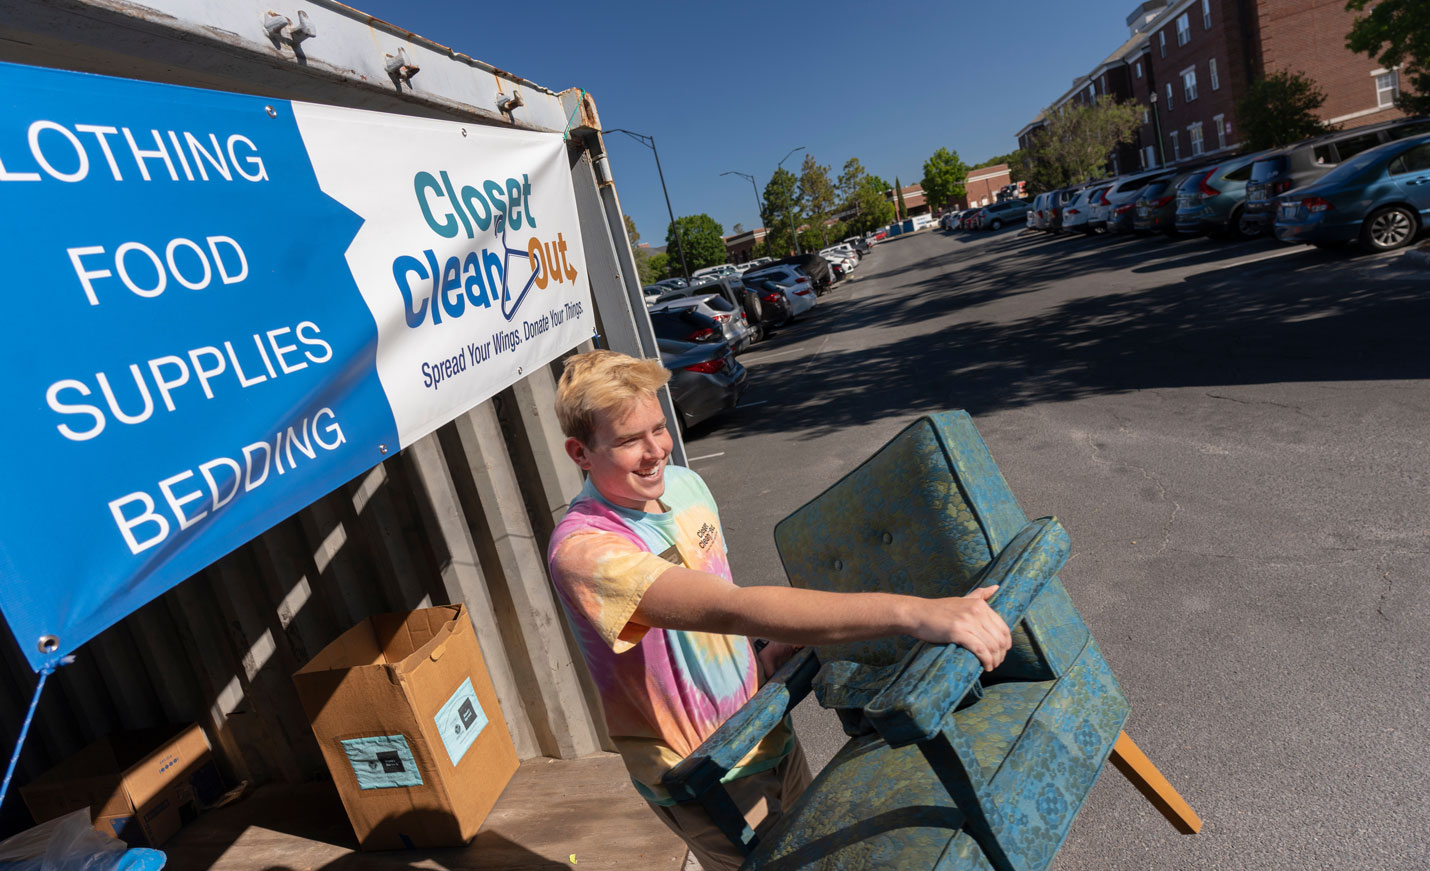 Male presenting student lifts a teal chair out of a donation container